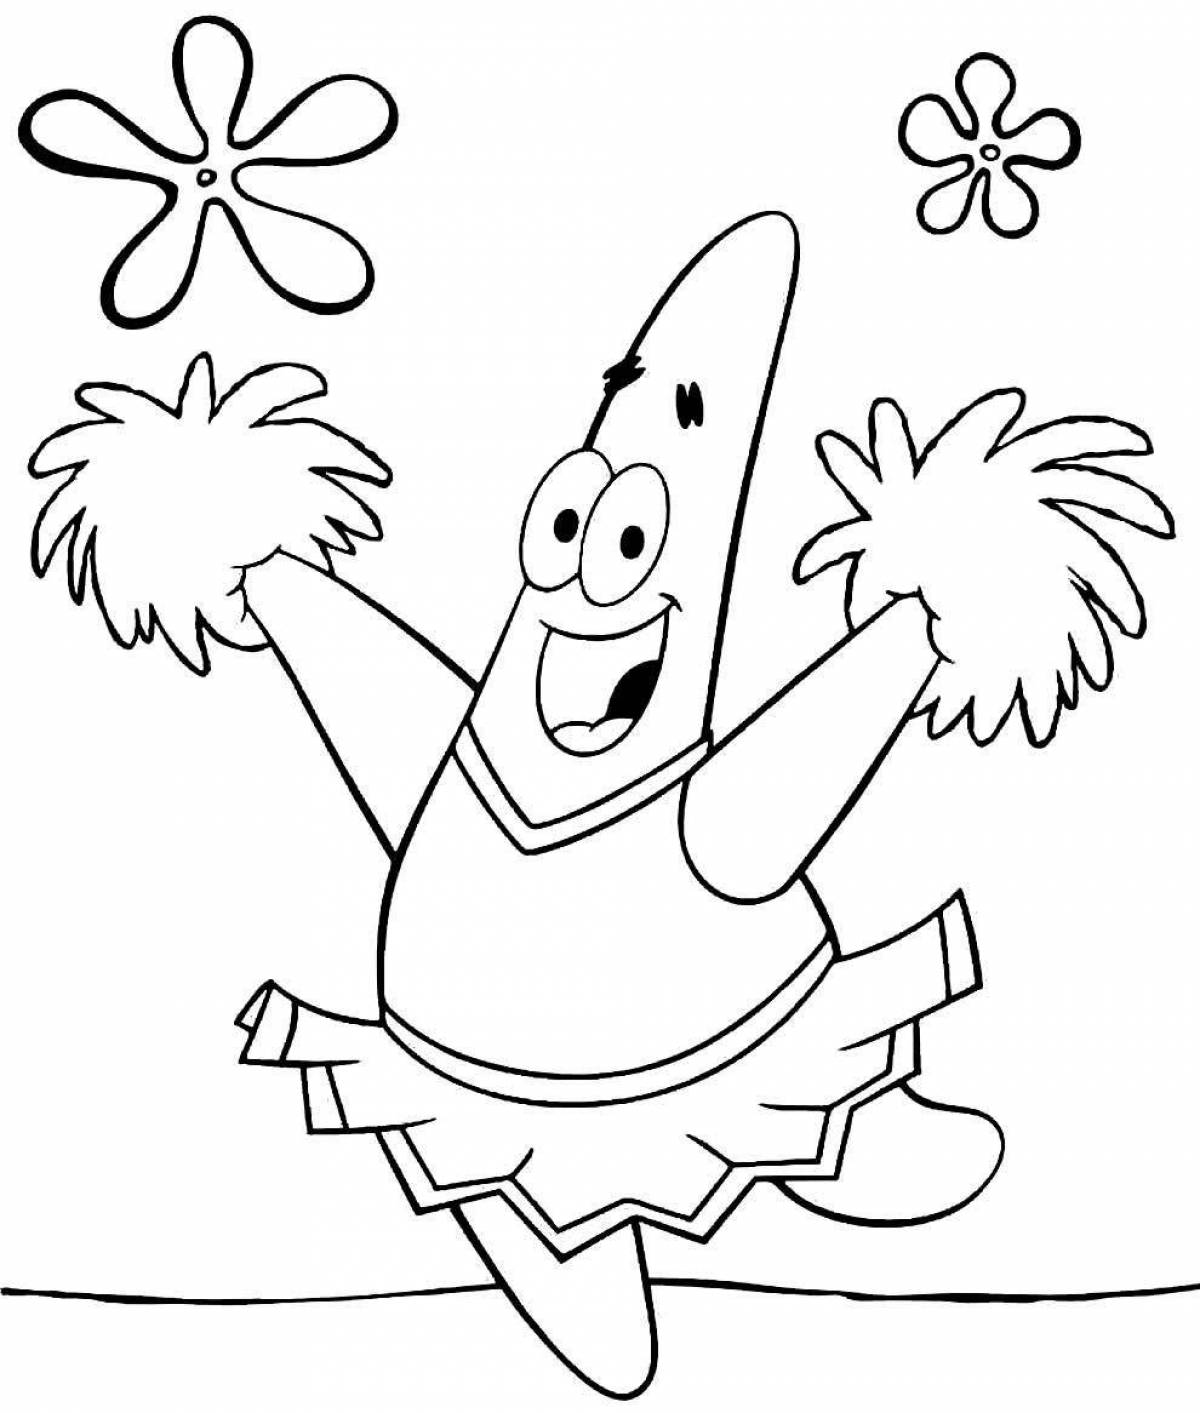 3 Marker Enchantment Coloring Page